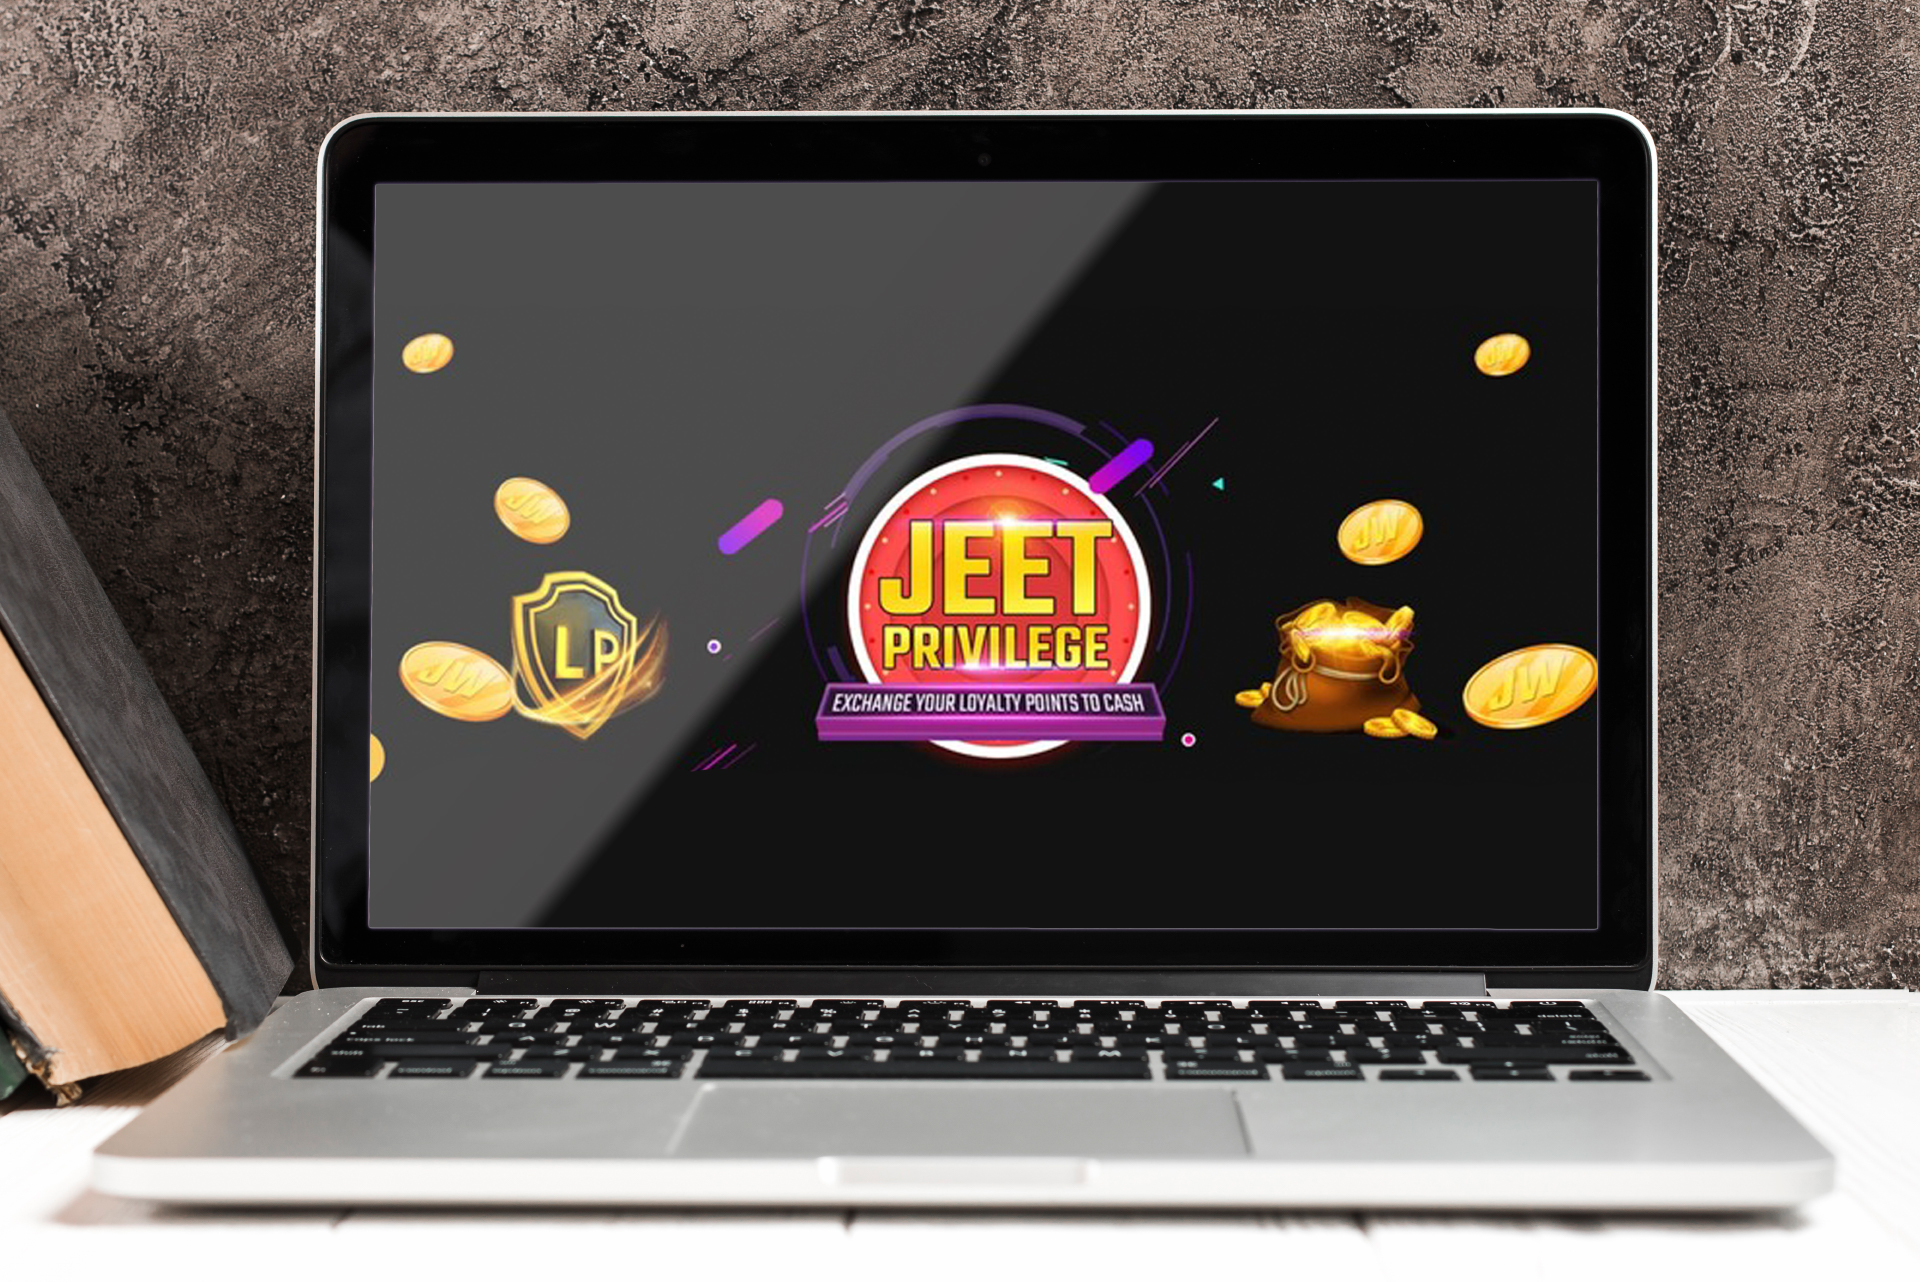 The Jeet Privilege Program allow to exchange your loyalty points for cash.